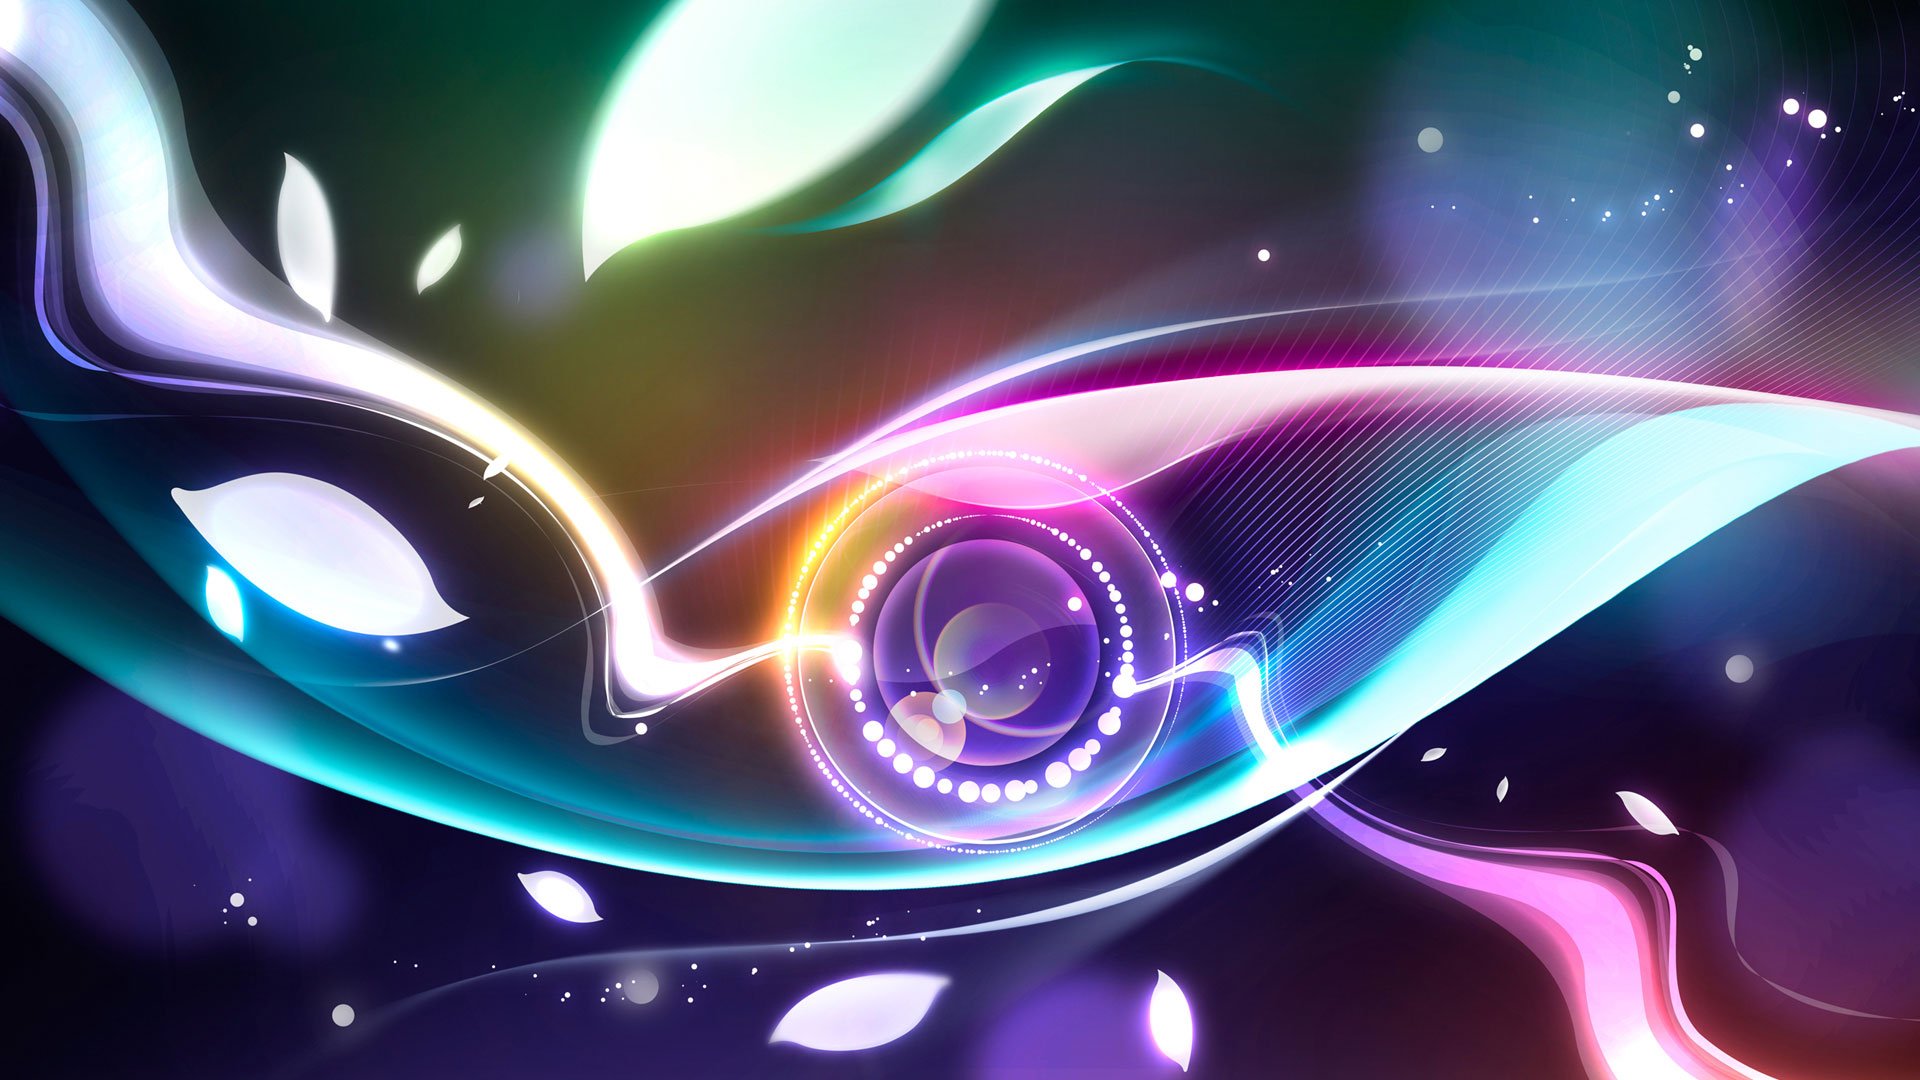  download Digital Abstract Eye Wallpapers HD Wallpapers 1920x1080